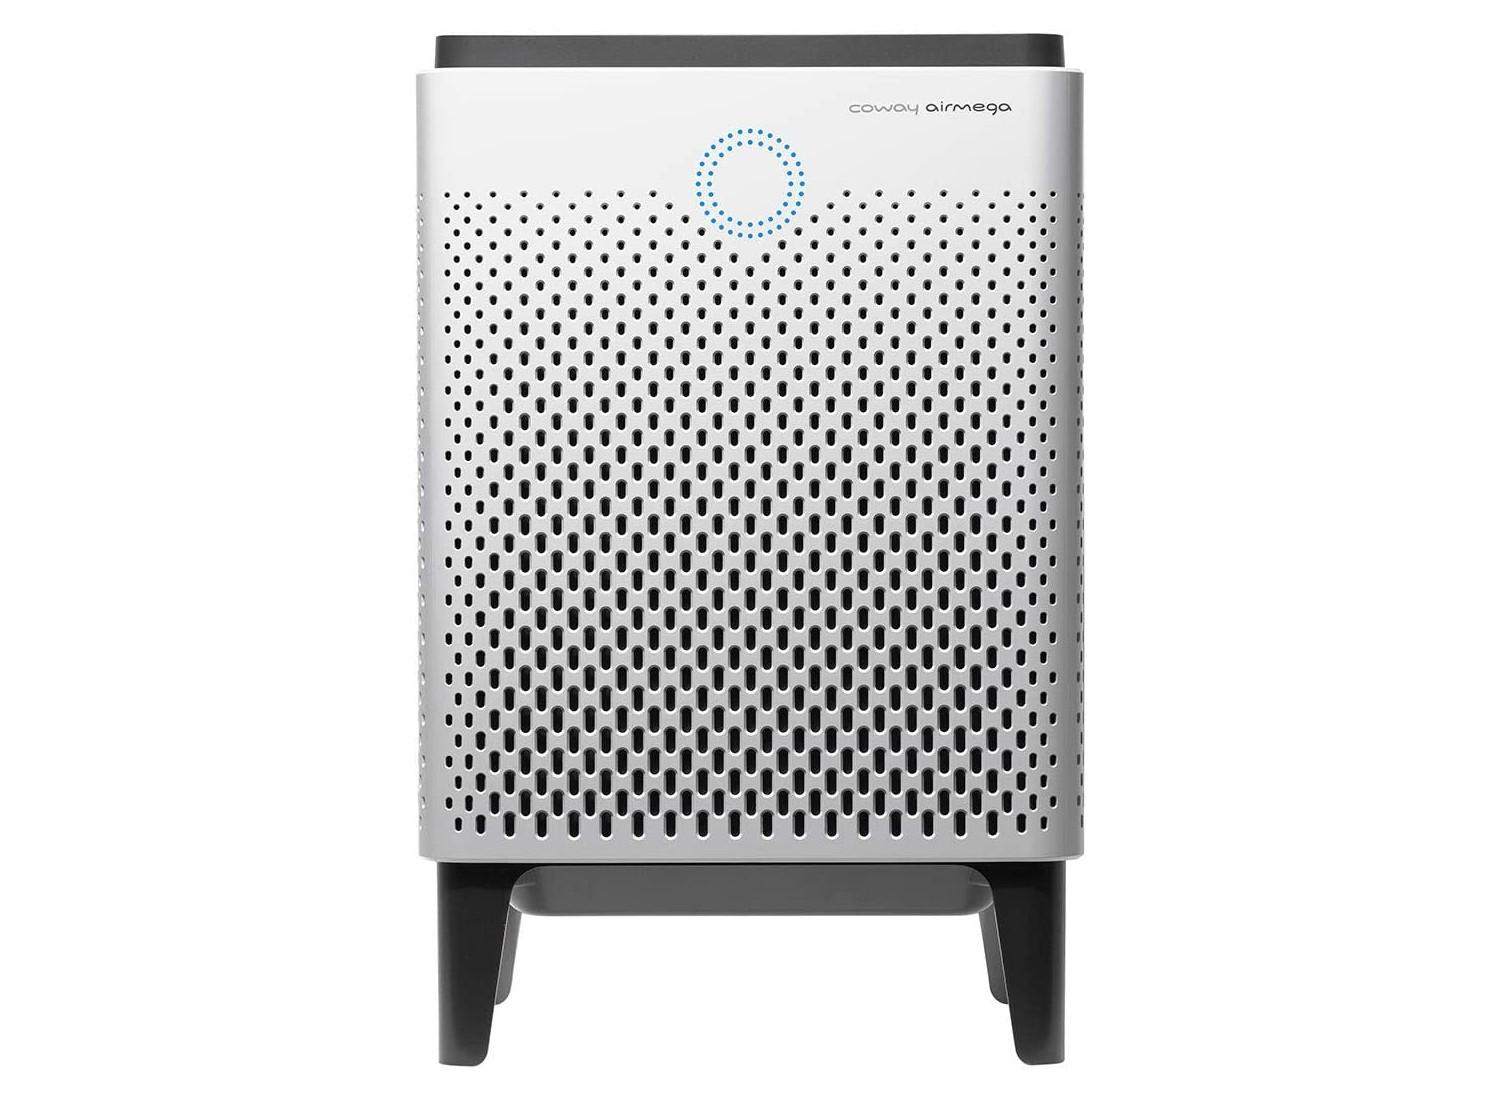 A Coway air purifier on a white background.